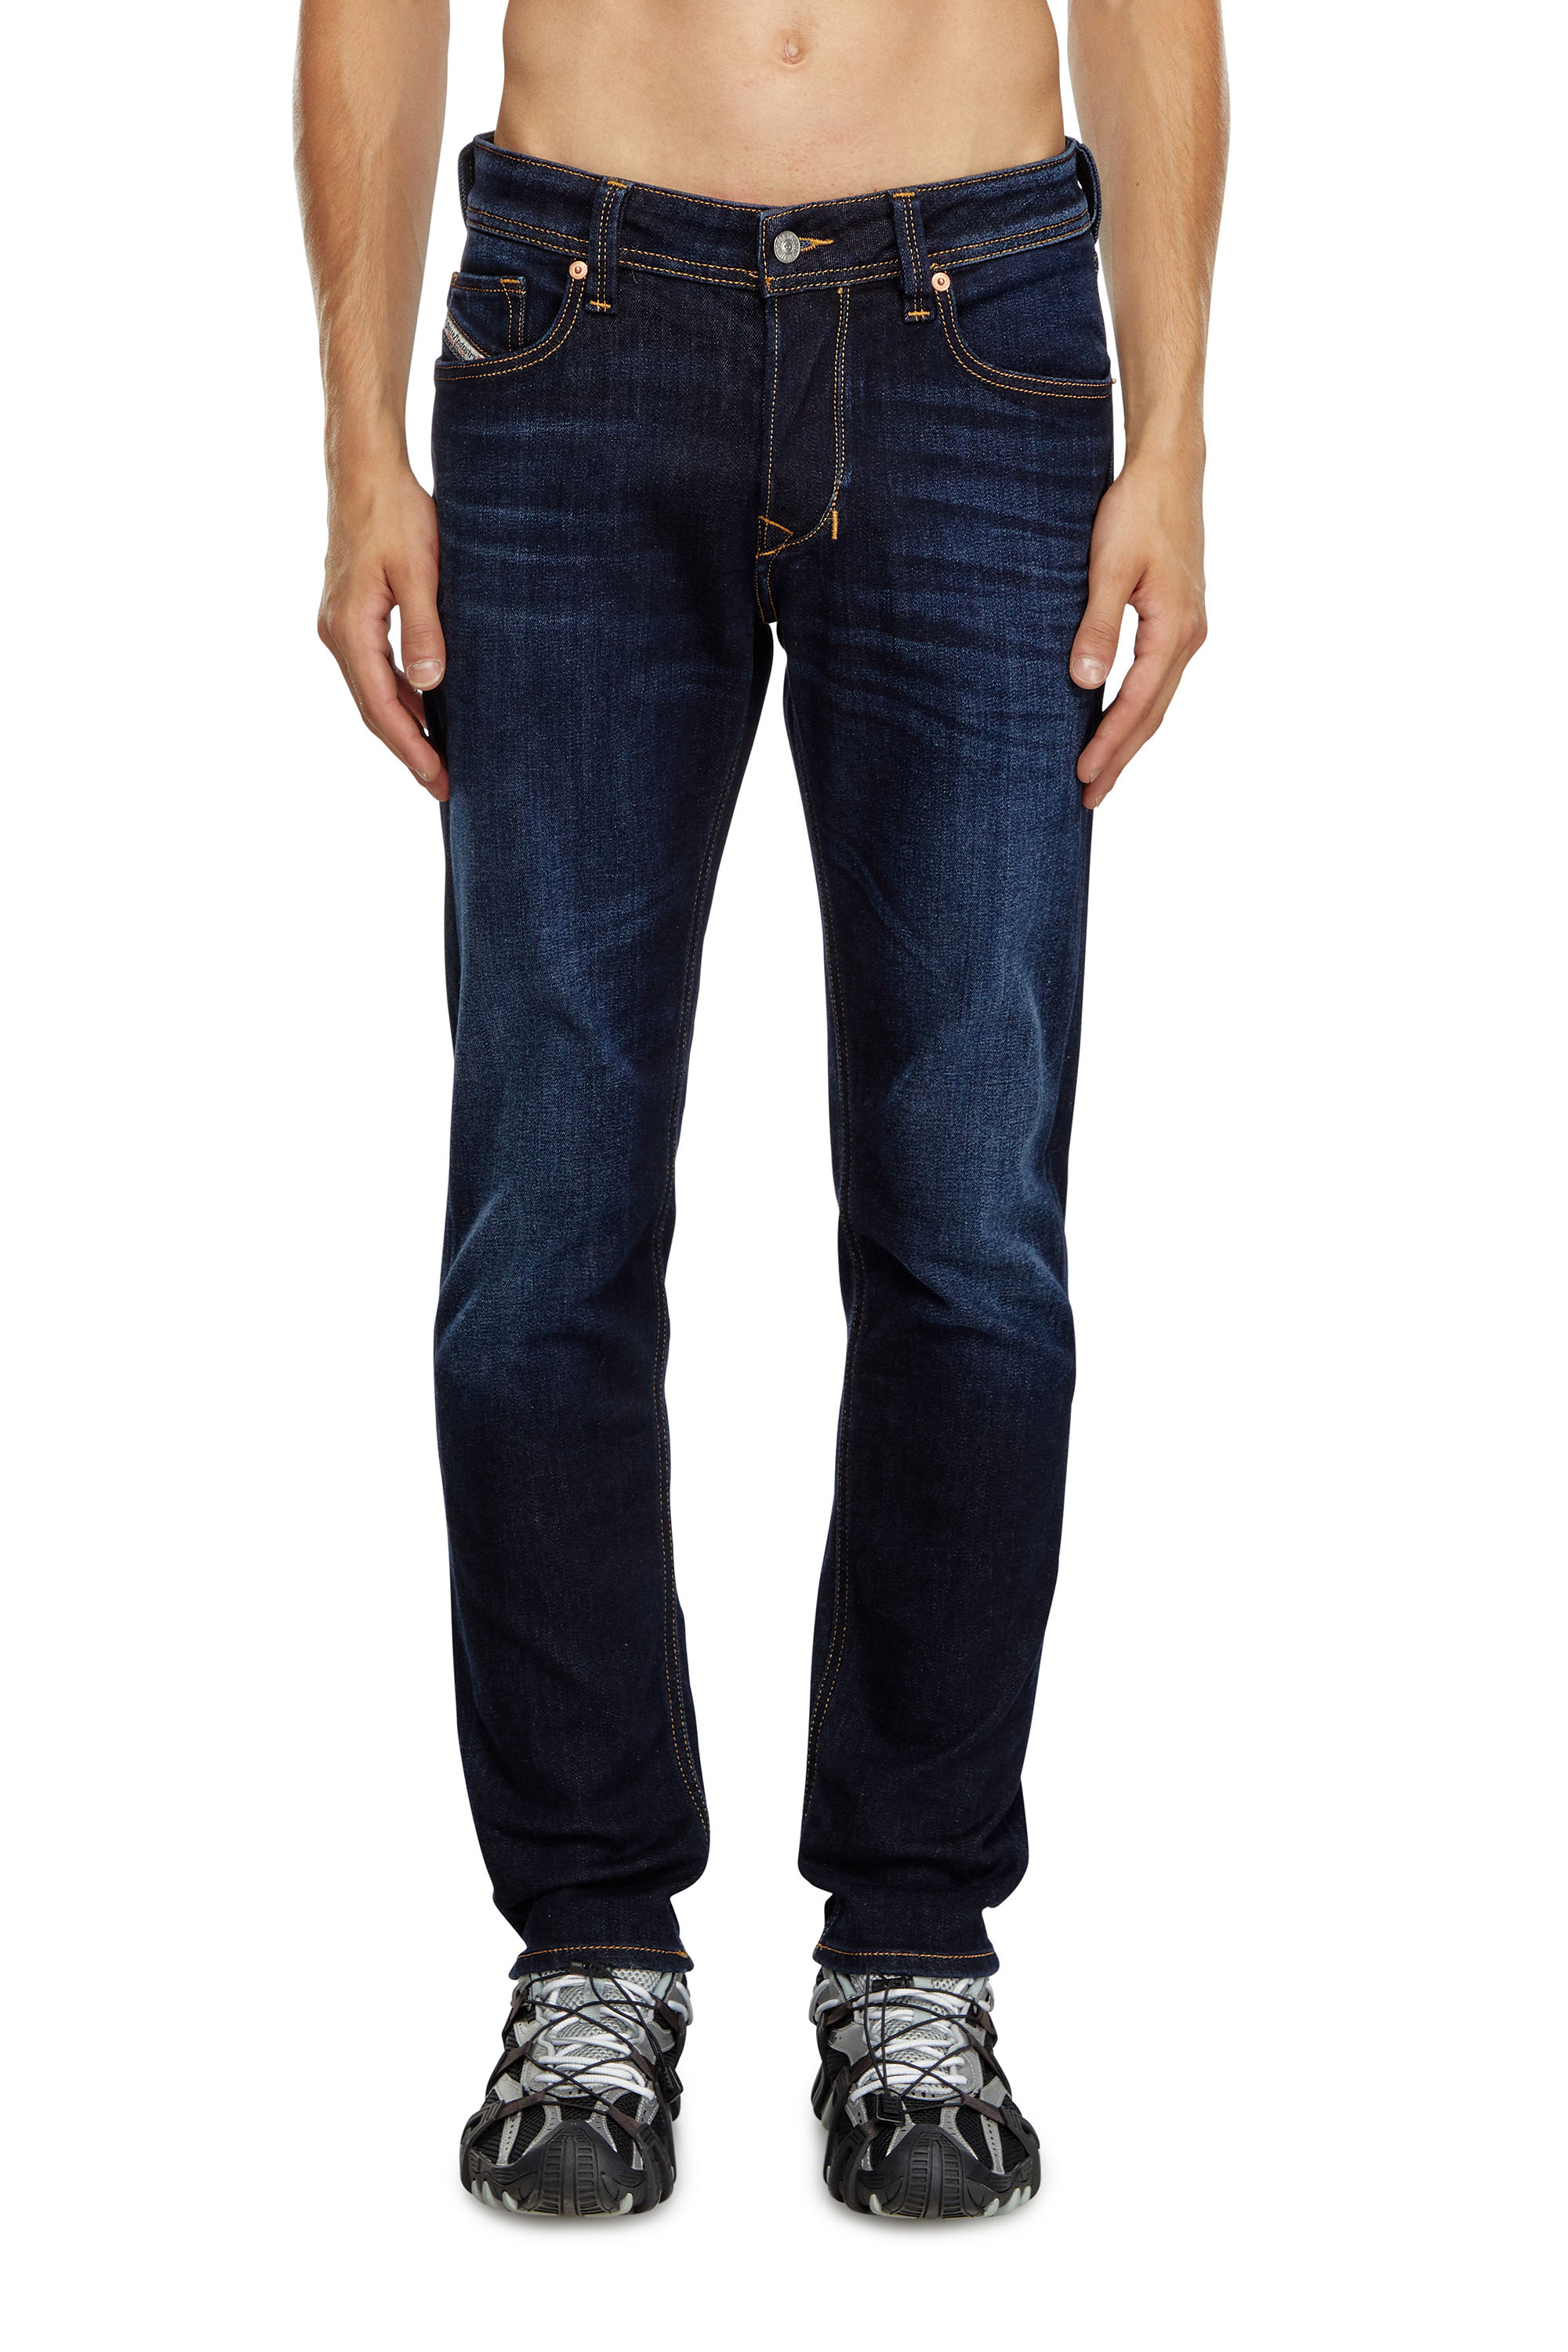 Diesel - Tapered Jeans 1986 Larkee-Beex 009ZS, Hombre Tapered Jeans - 1986 Larkee-Beex in Azul marino - Image 1